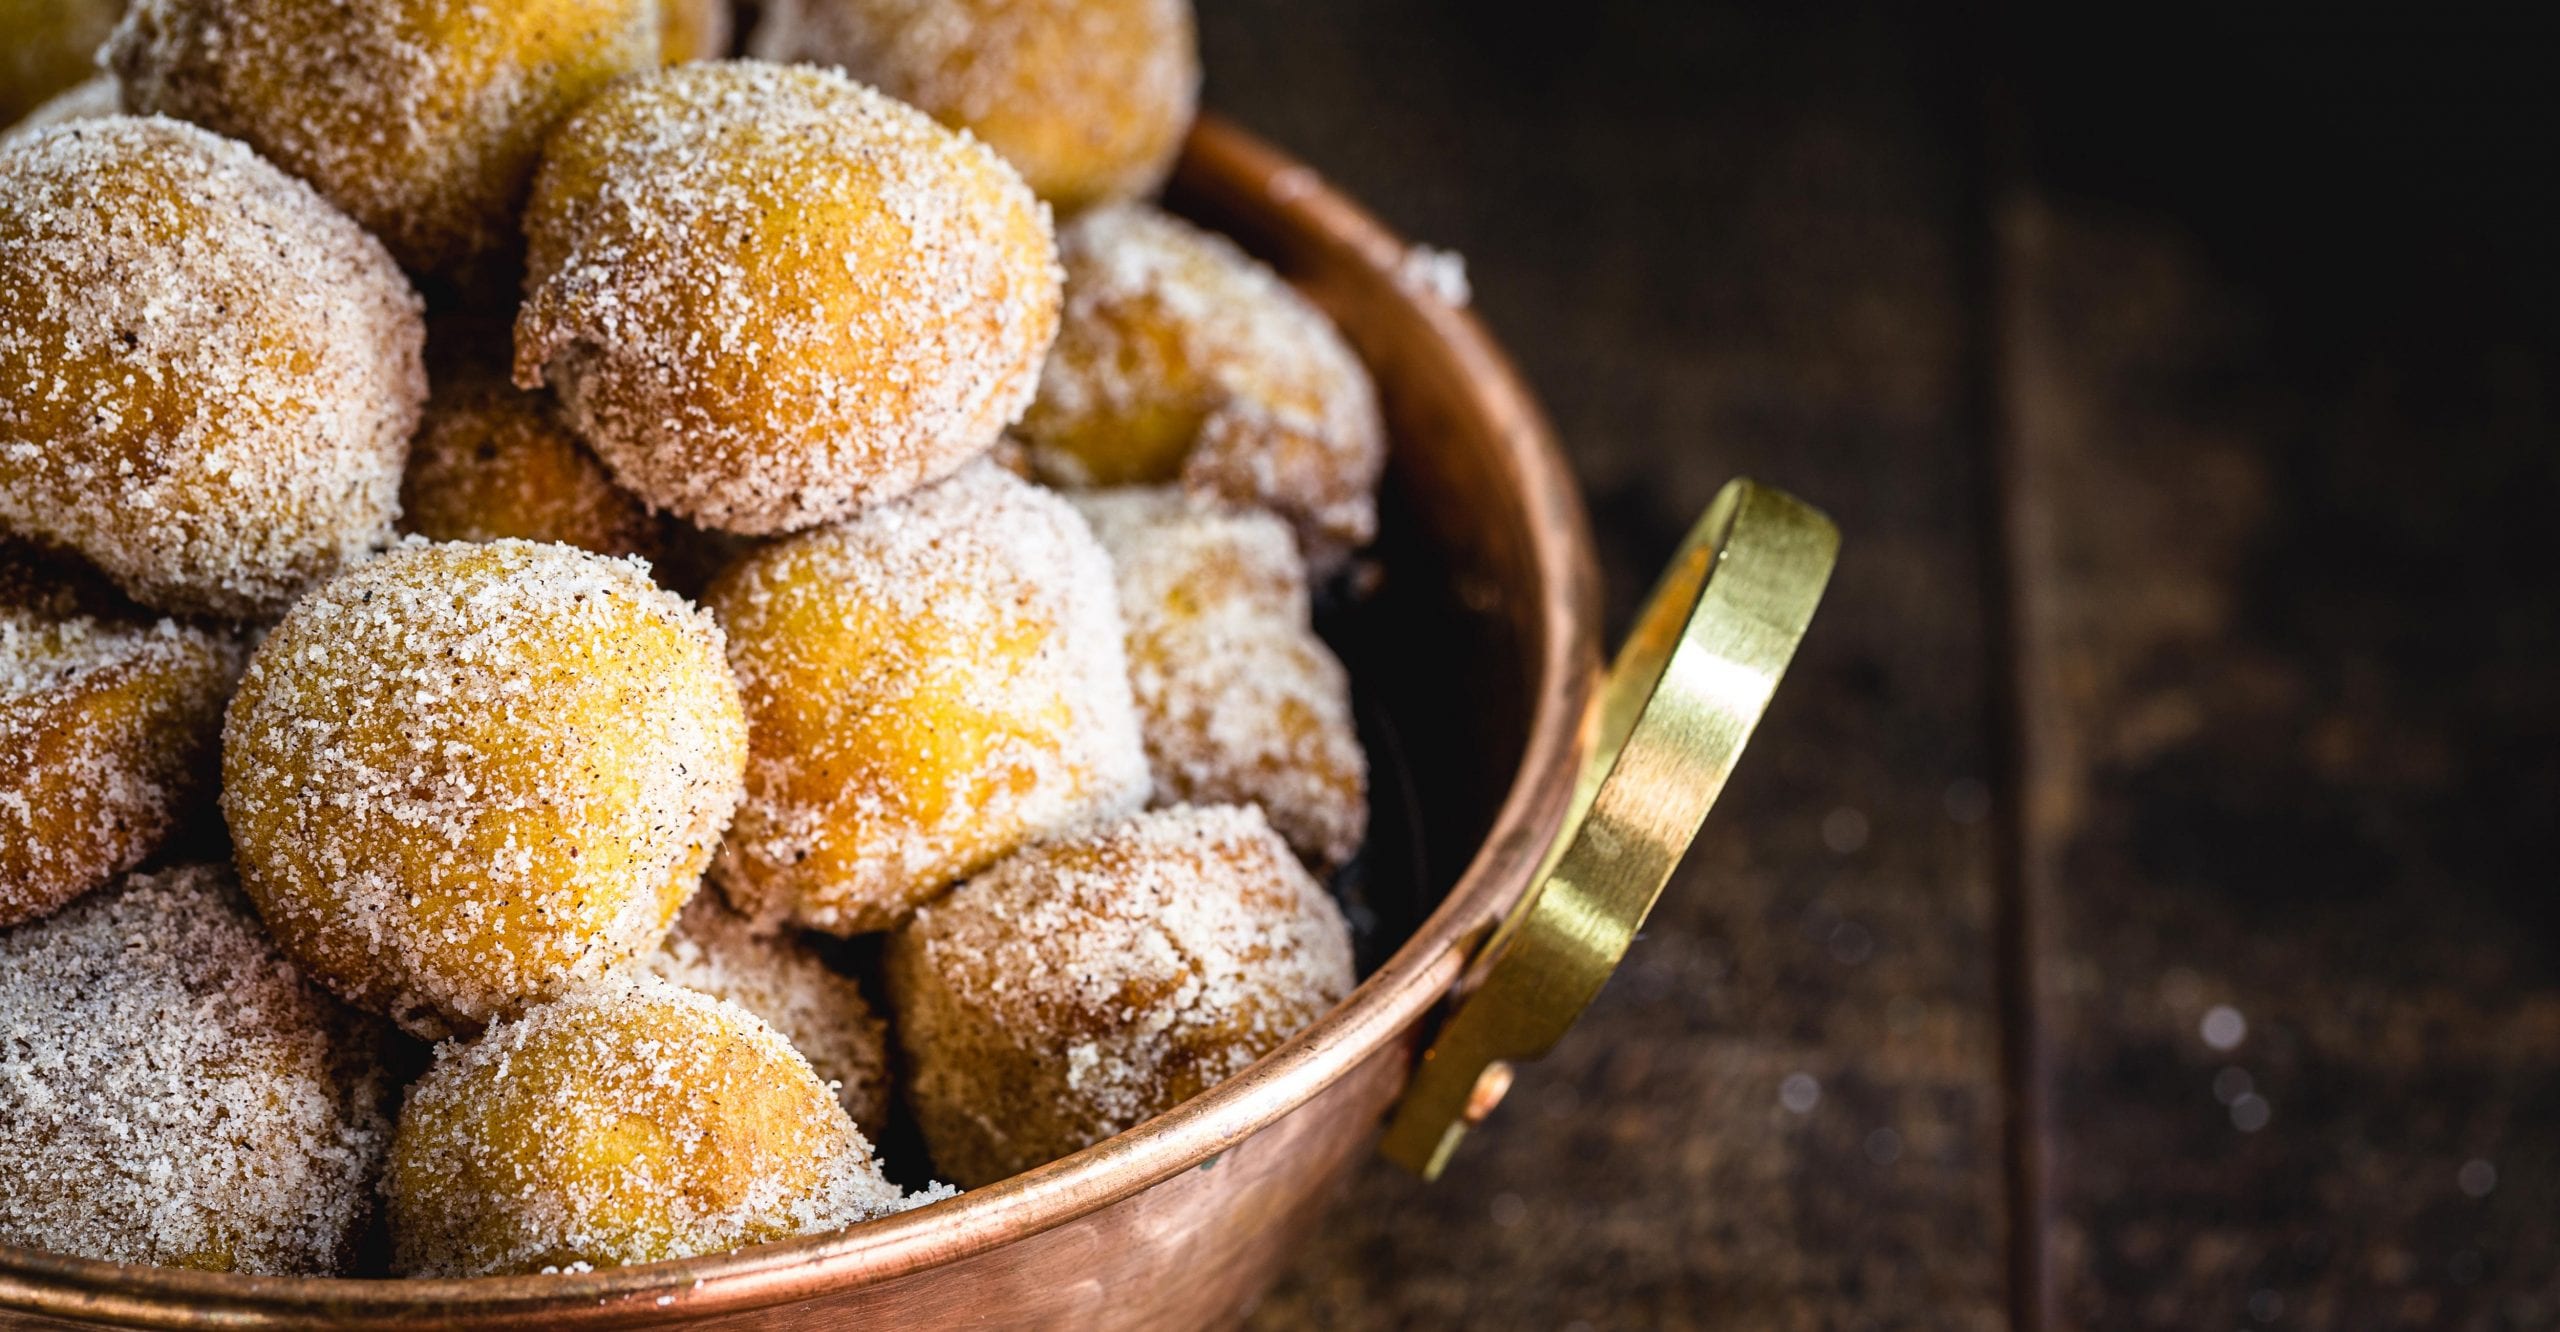 A copper bowl filled with Croatian fritules with powdered sugar on top.